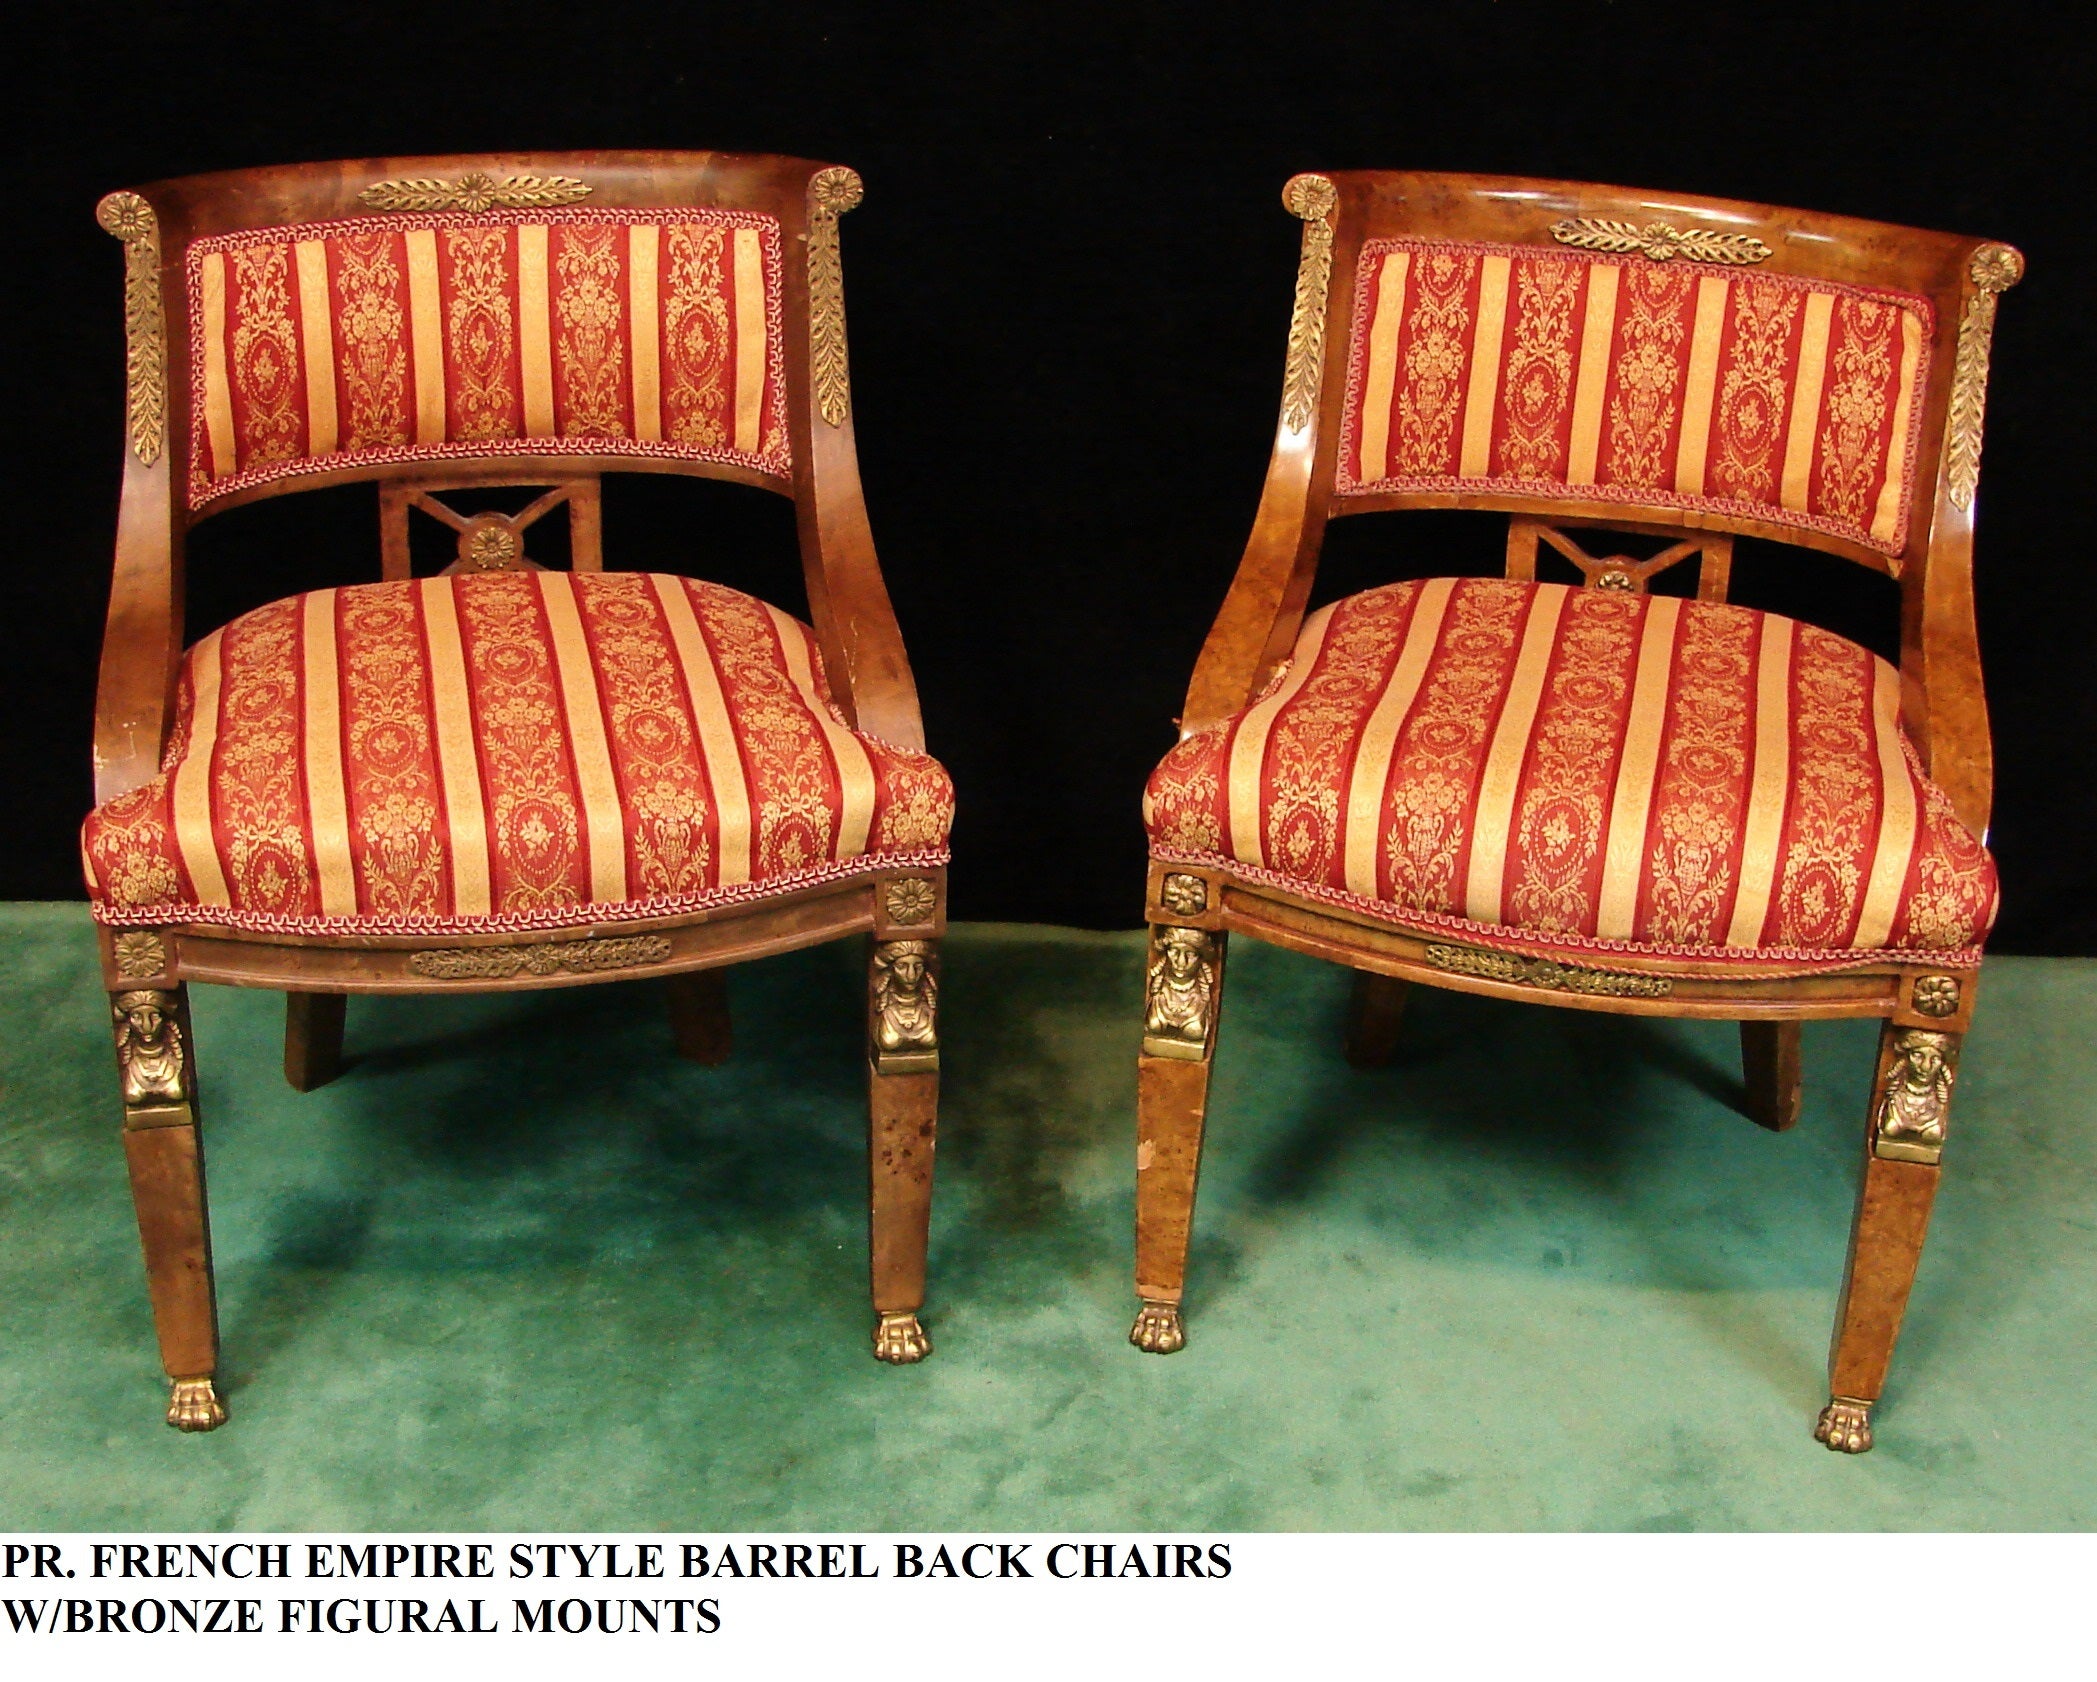 Pair of Antique French Empire Barrel Back Chairs